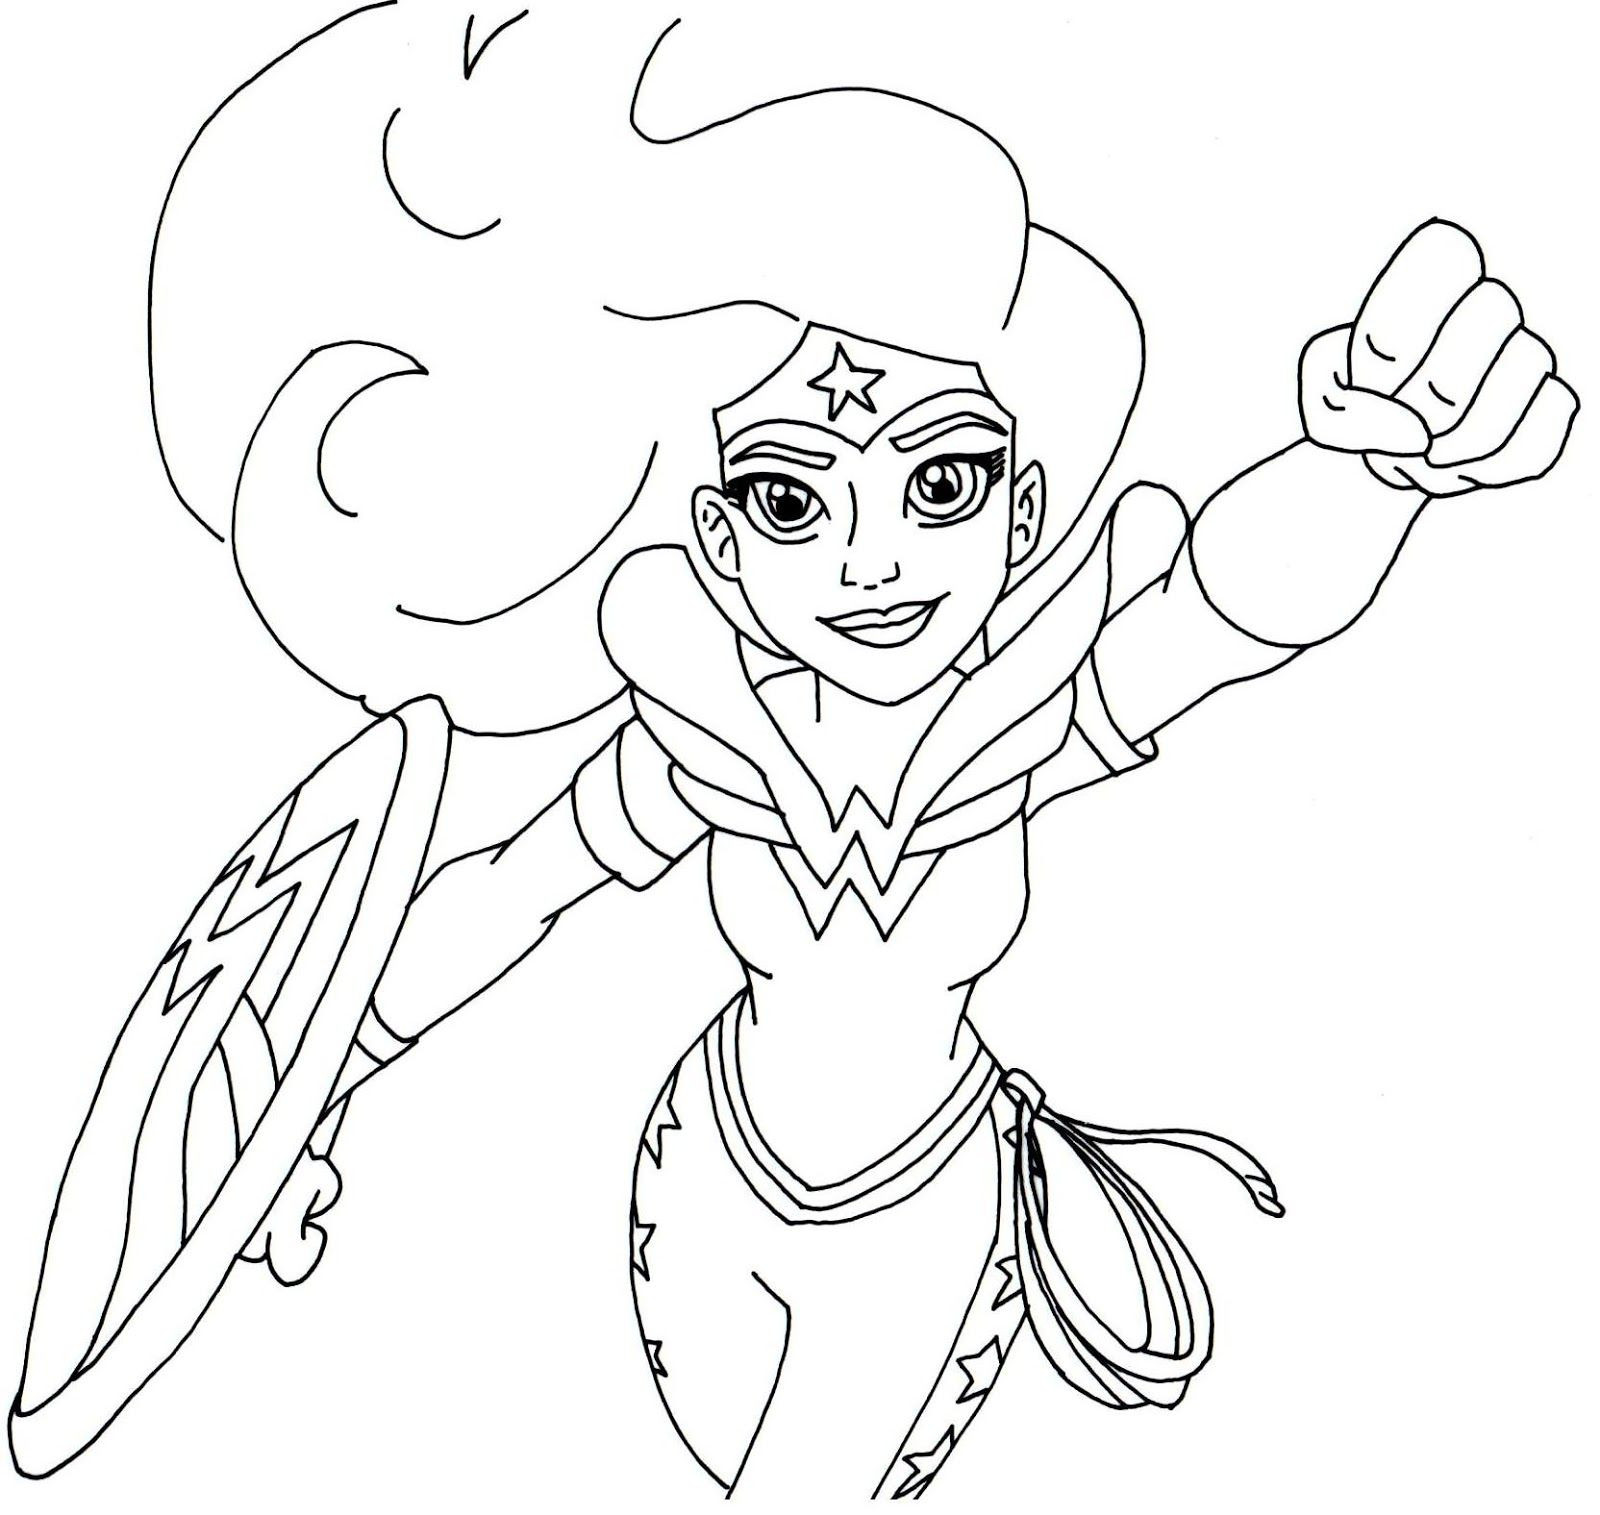 Girl Superhero Coloring Pages Free
 Free printable super hero high coloring page for Wonder